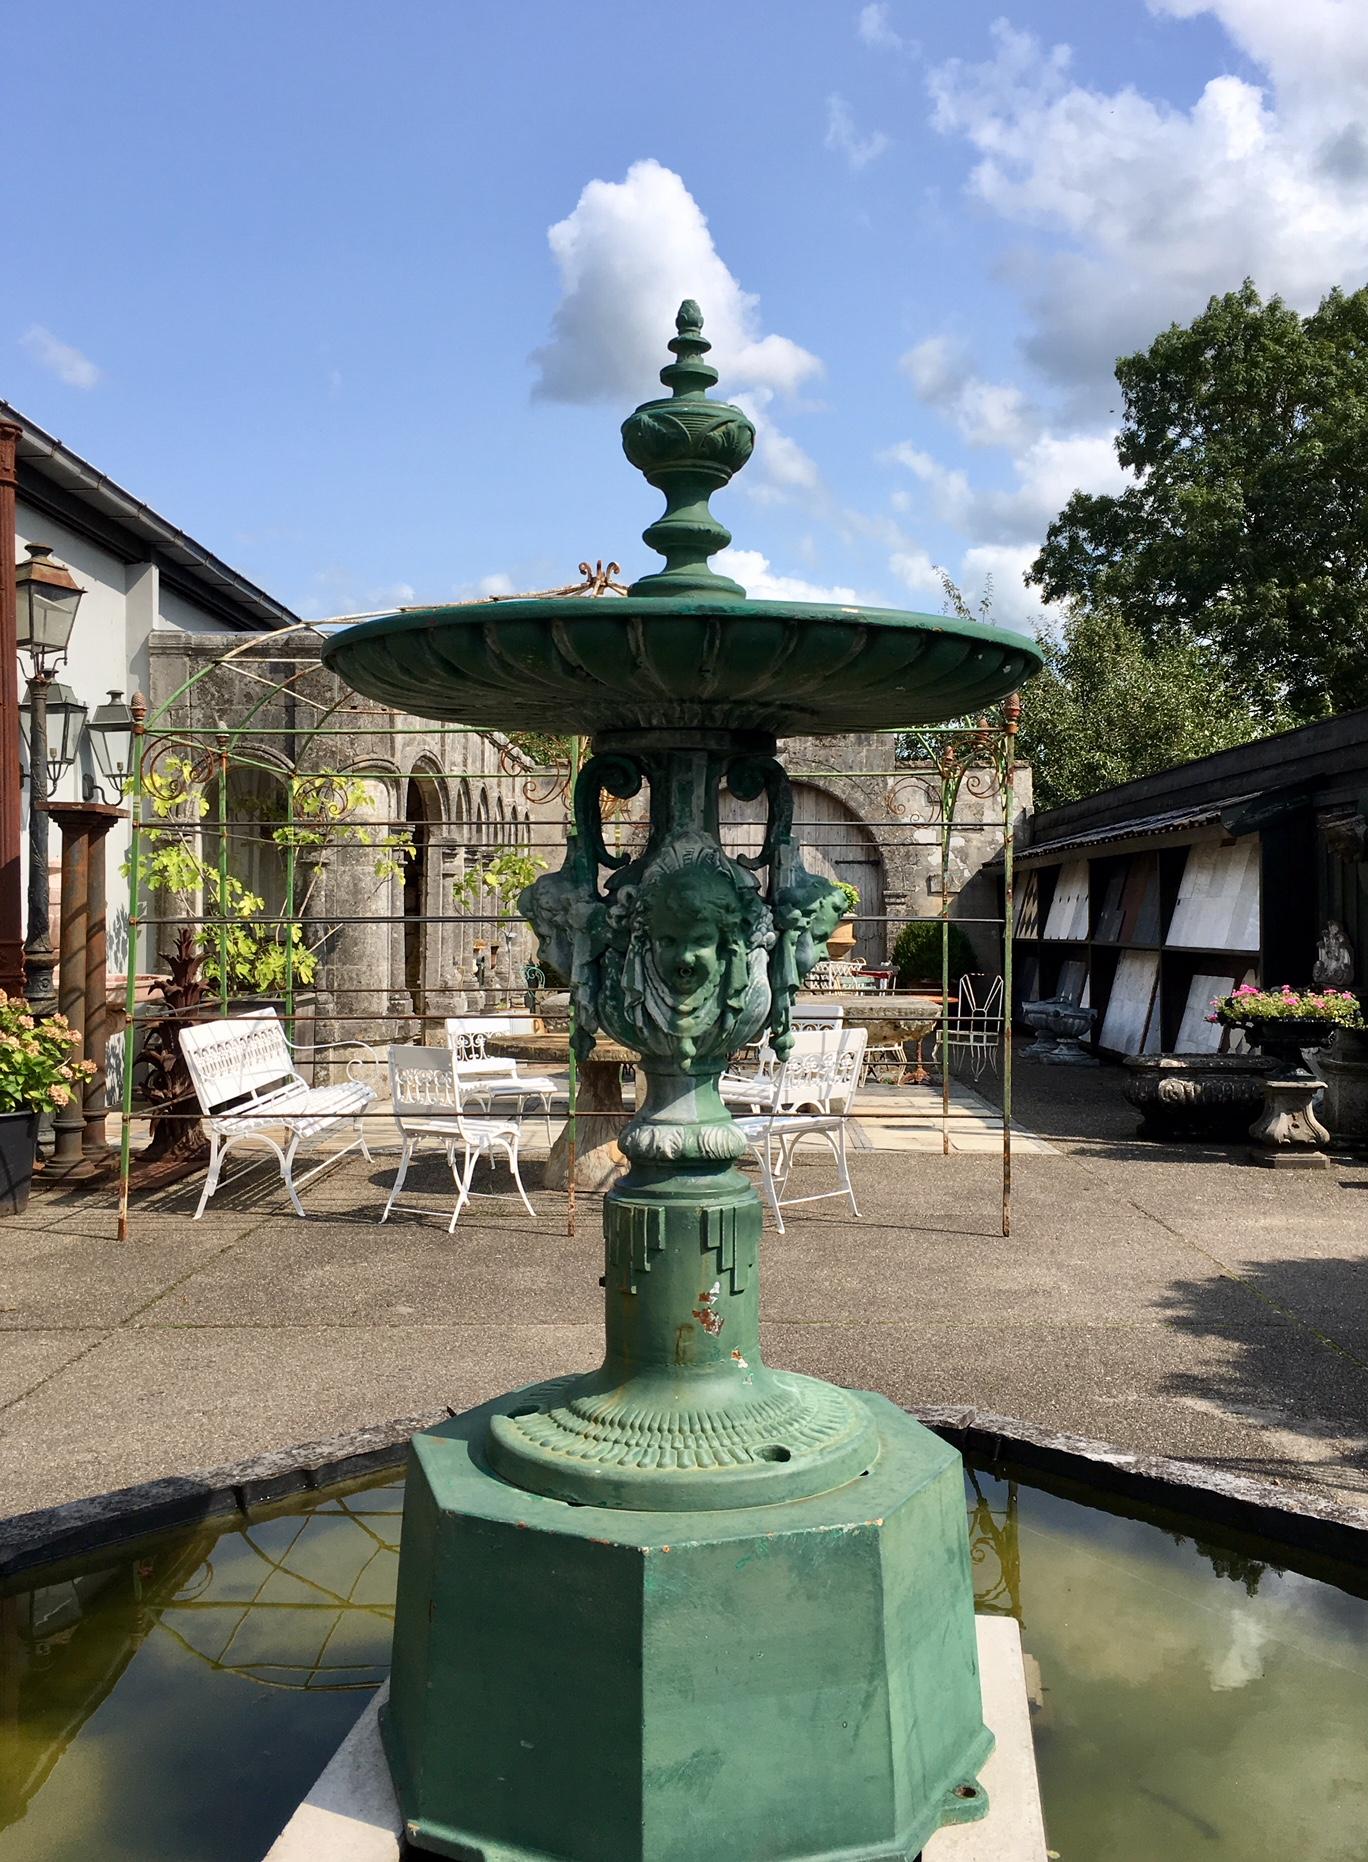 Beautiful antique French cast iron city fountain. Made circa 1900 this fountain decorated a city square. Decorated with Art Deco and Art Nouveau ornaments and women’s heads, from which water sprouts. The fountain is for sale excluding the fountain